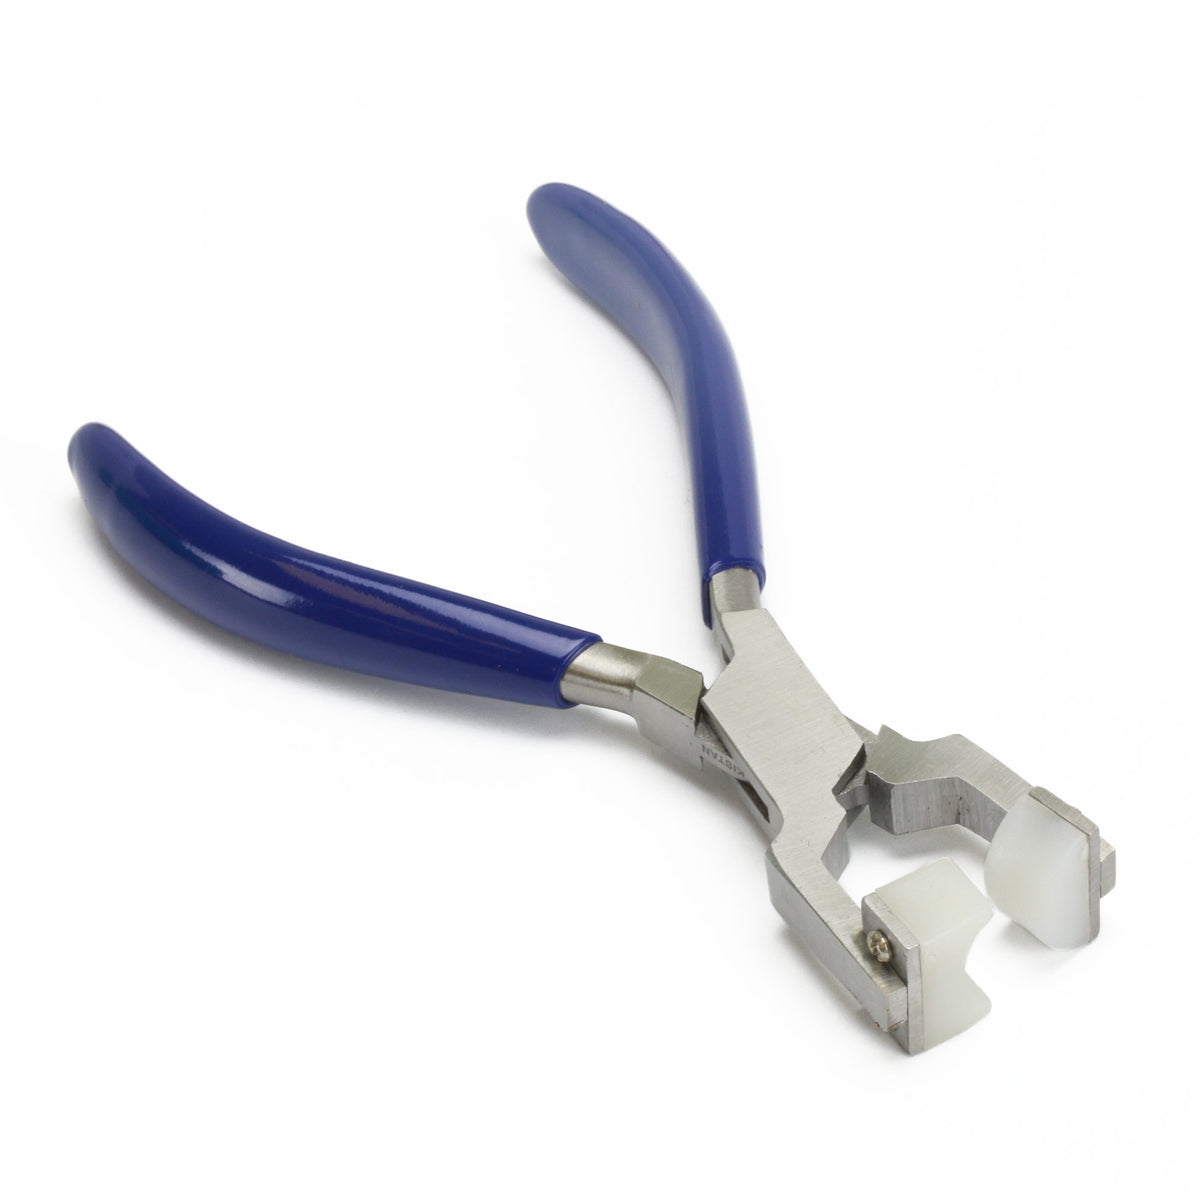 Which Pliers Should I Use? - Working Silver, Jewelry Making Tools &  Supplies